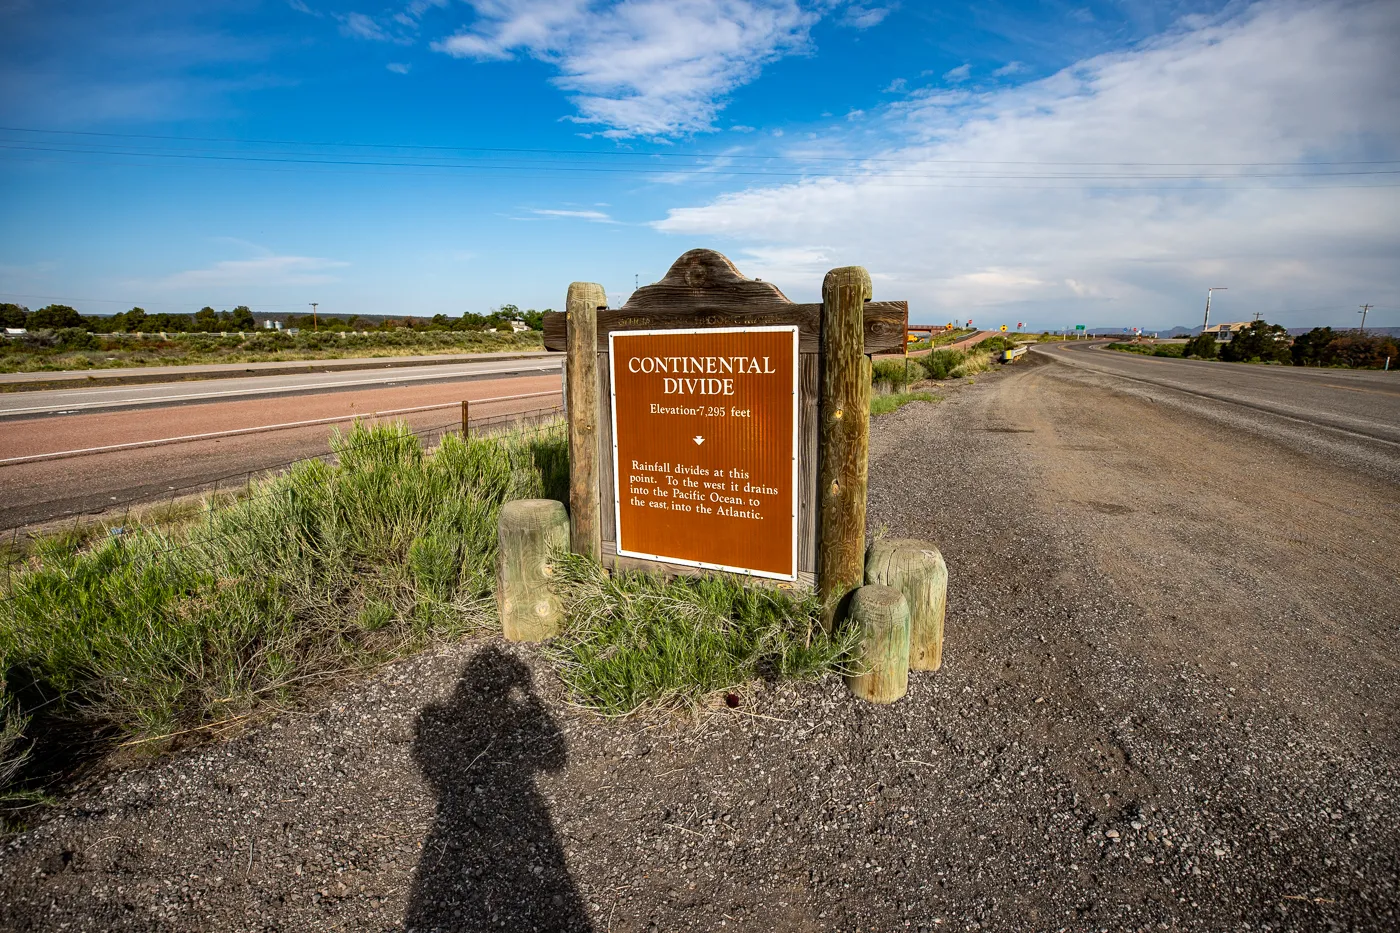 Continental Divide Marker in New Mexico (Route 66)